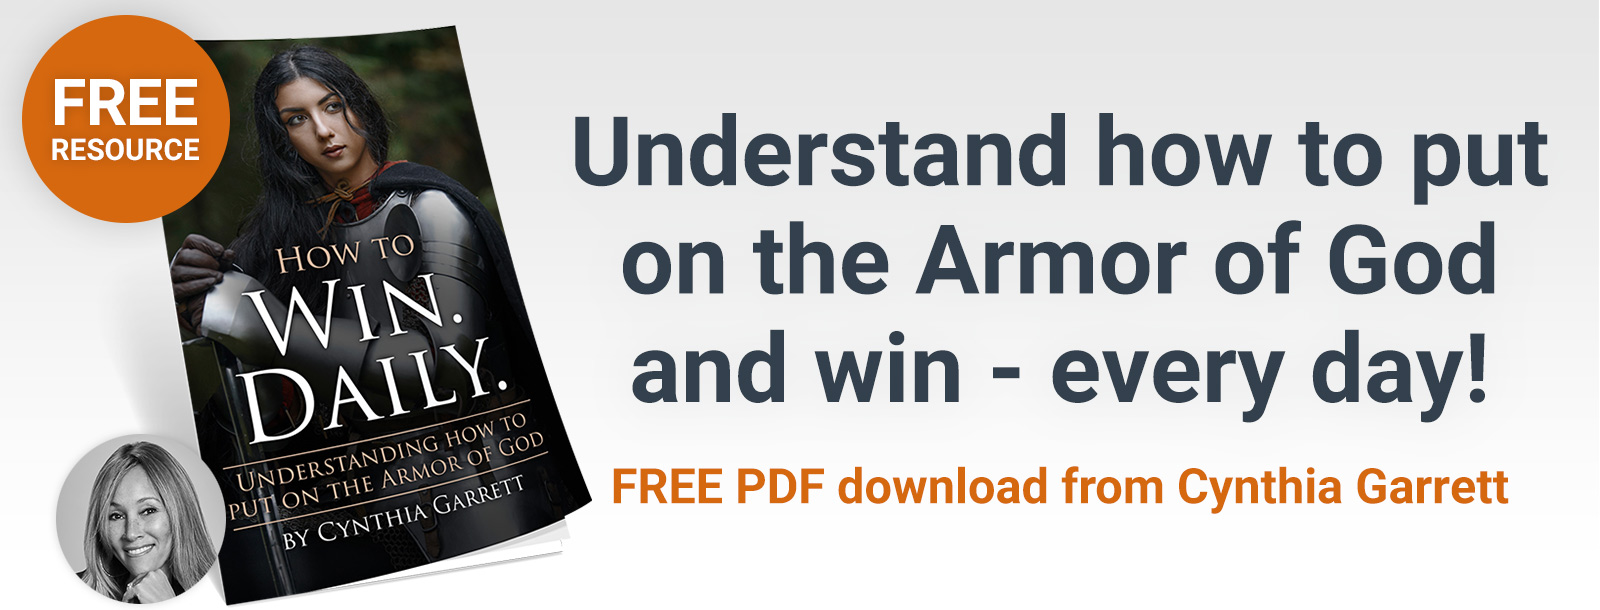 Understand how to put on the Armor of God and win - every day with your free PDF download from Cynthia Garrett